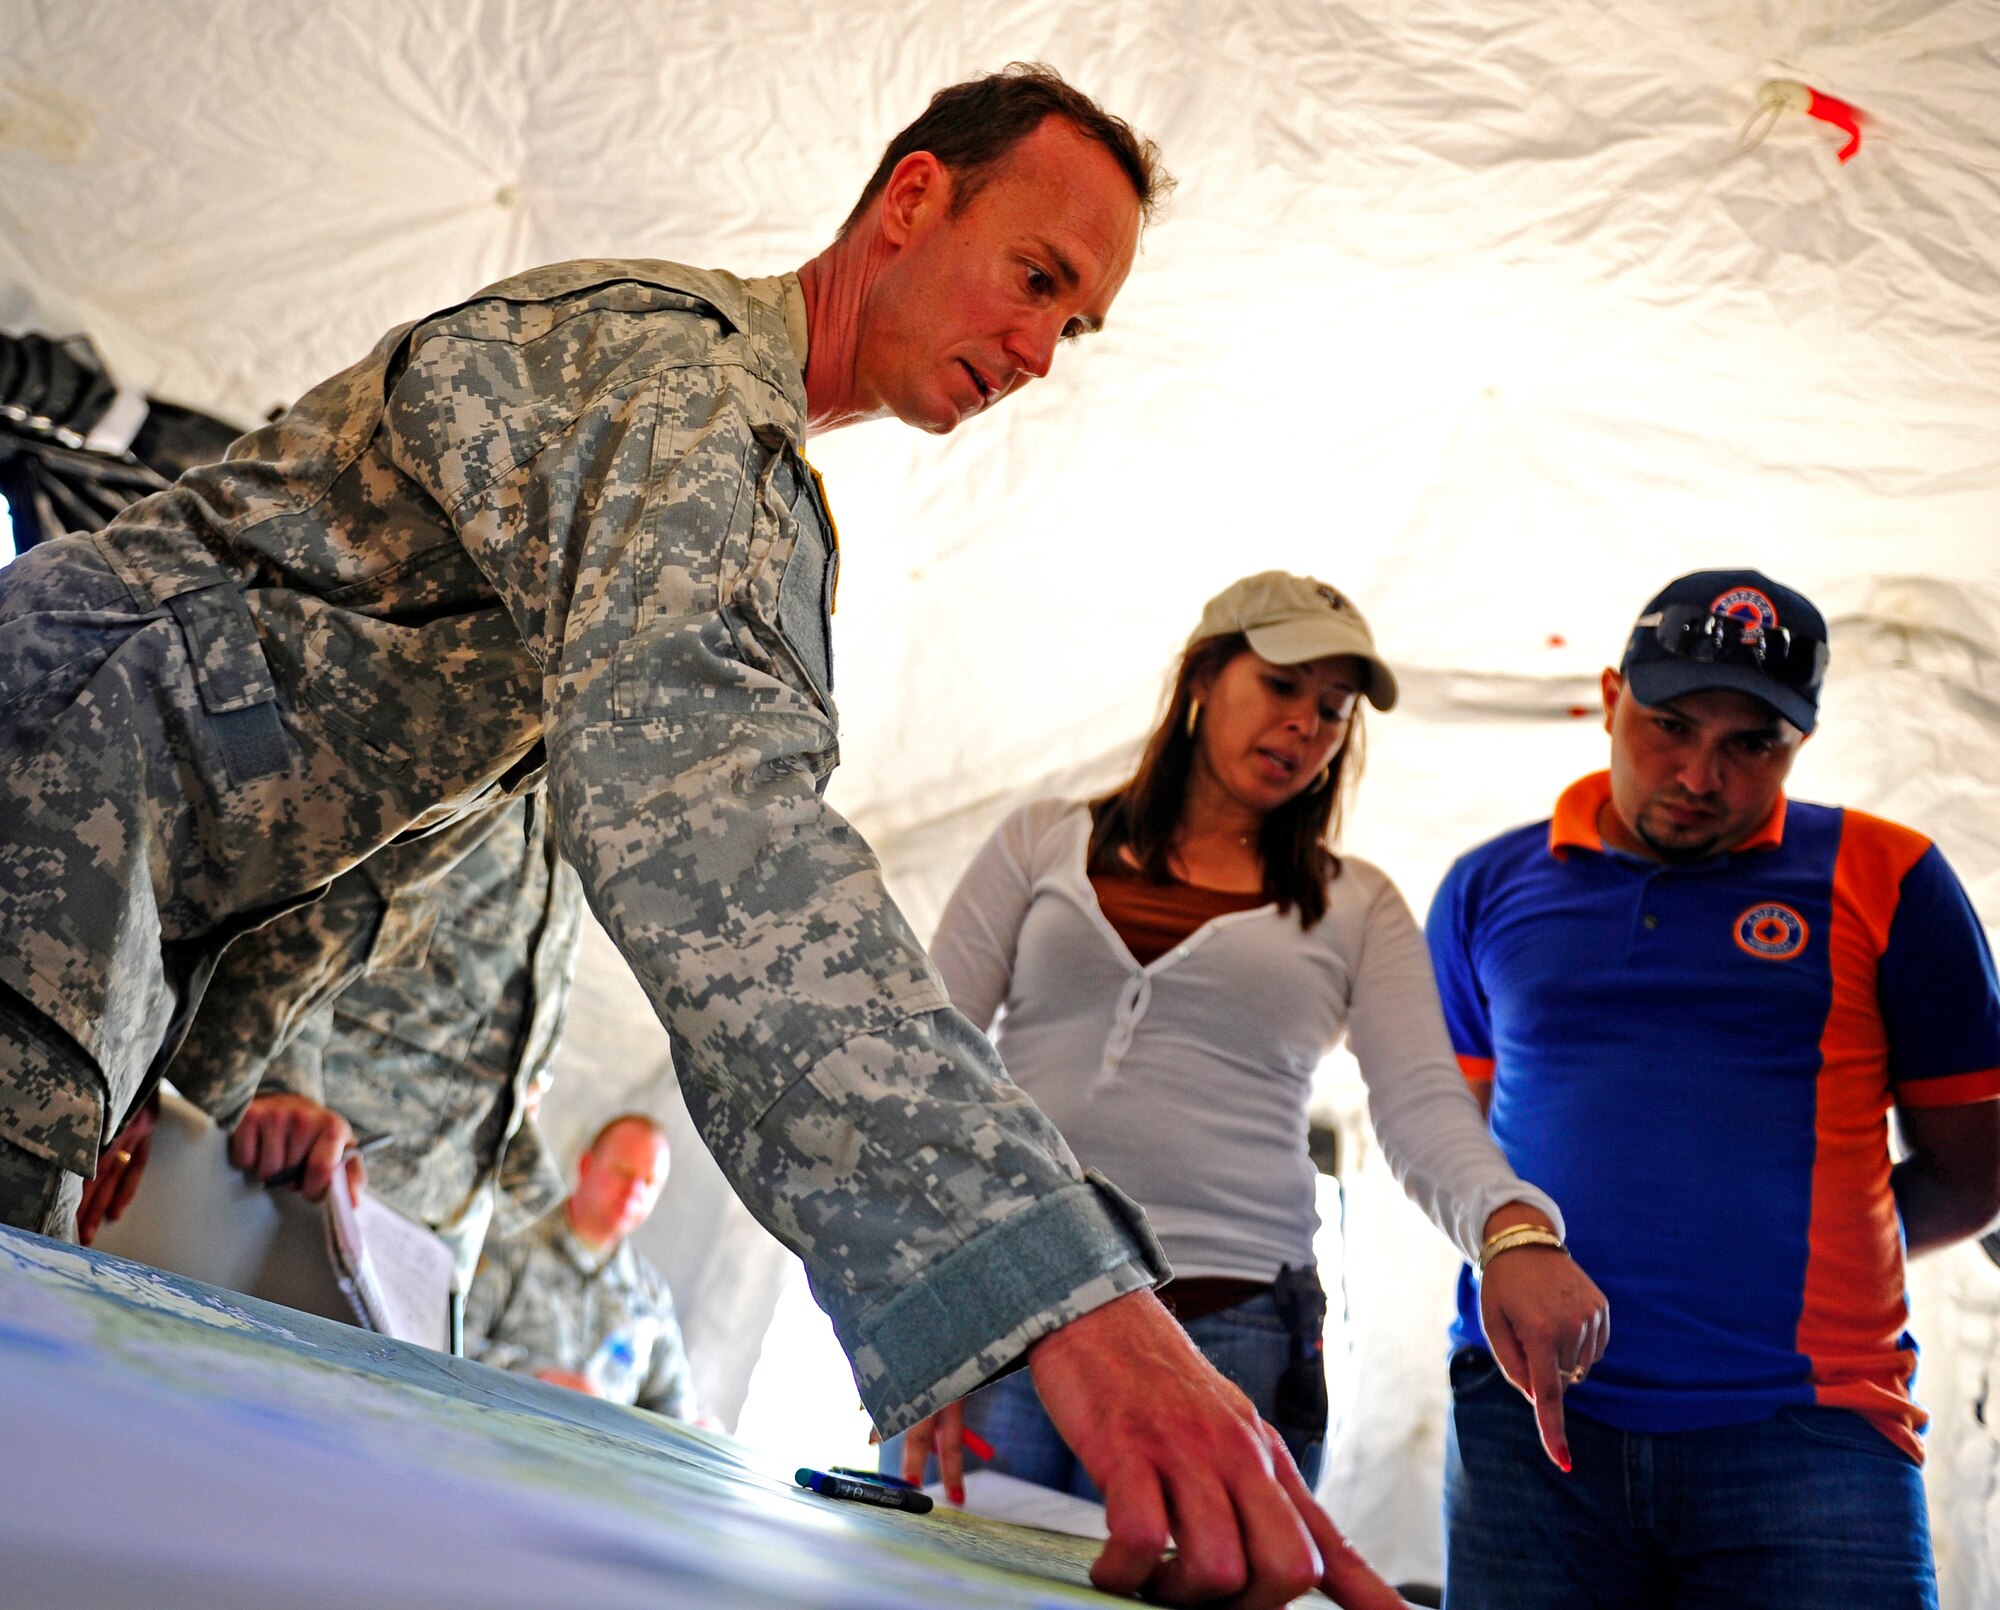 United States Army Chief Warrant Officer Edmond Bessette, CENTAM Survey and Assessment Team member and Iris Medina, C-SAT member identify the location of damage for a simulated hurricane with a Honduran Comision Permanente de Contingencias member, during a simulated Hurricane disaster response exercise at Puerto Castilla, Honduras, May 15. The C-SAT team responds to a natural disaster and humanitarian assistance notification in the Central America Region to conduct an assessment of the area before military forces are deployed.(Air Force photo by Staff Sgt. Eric Donner)